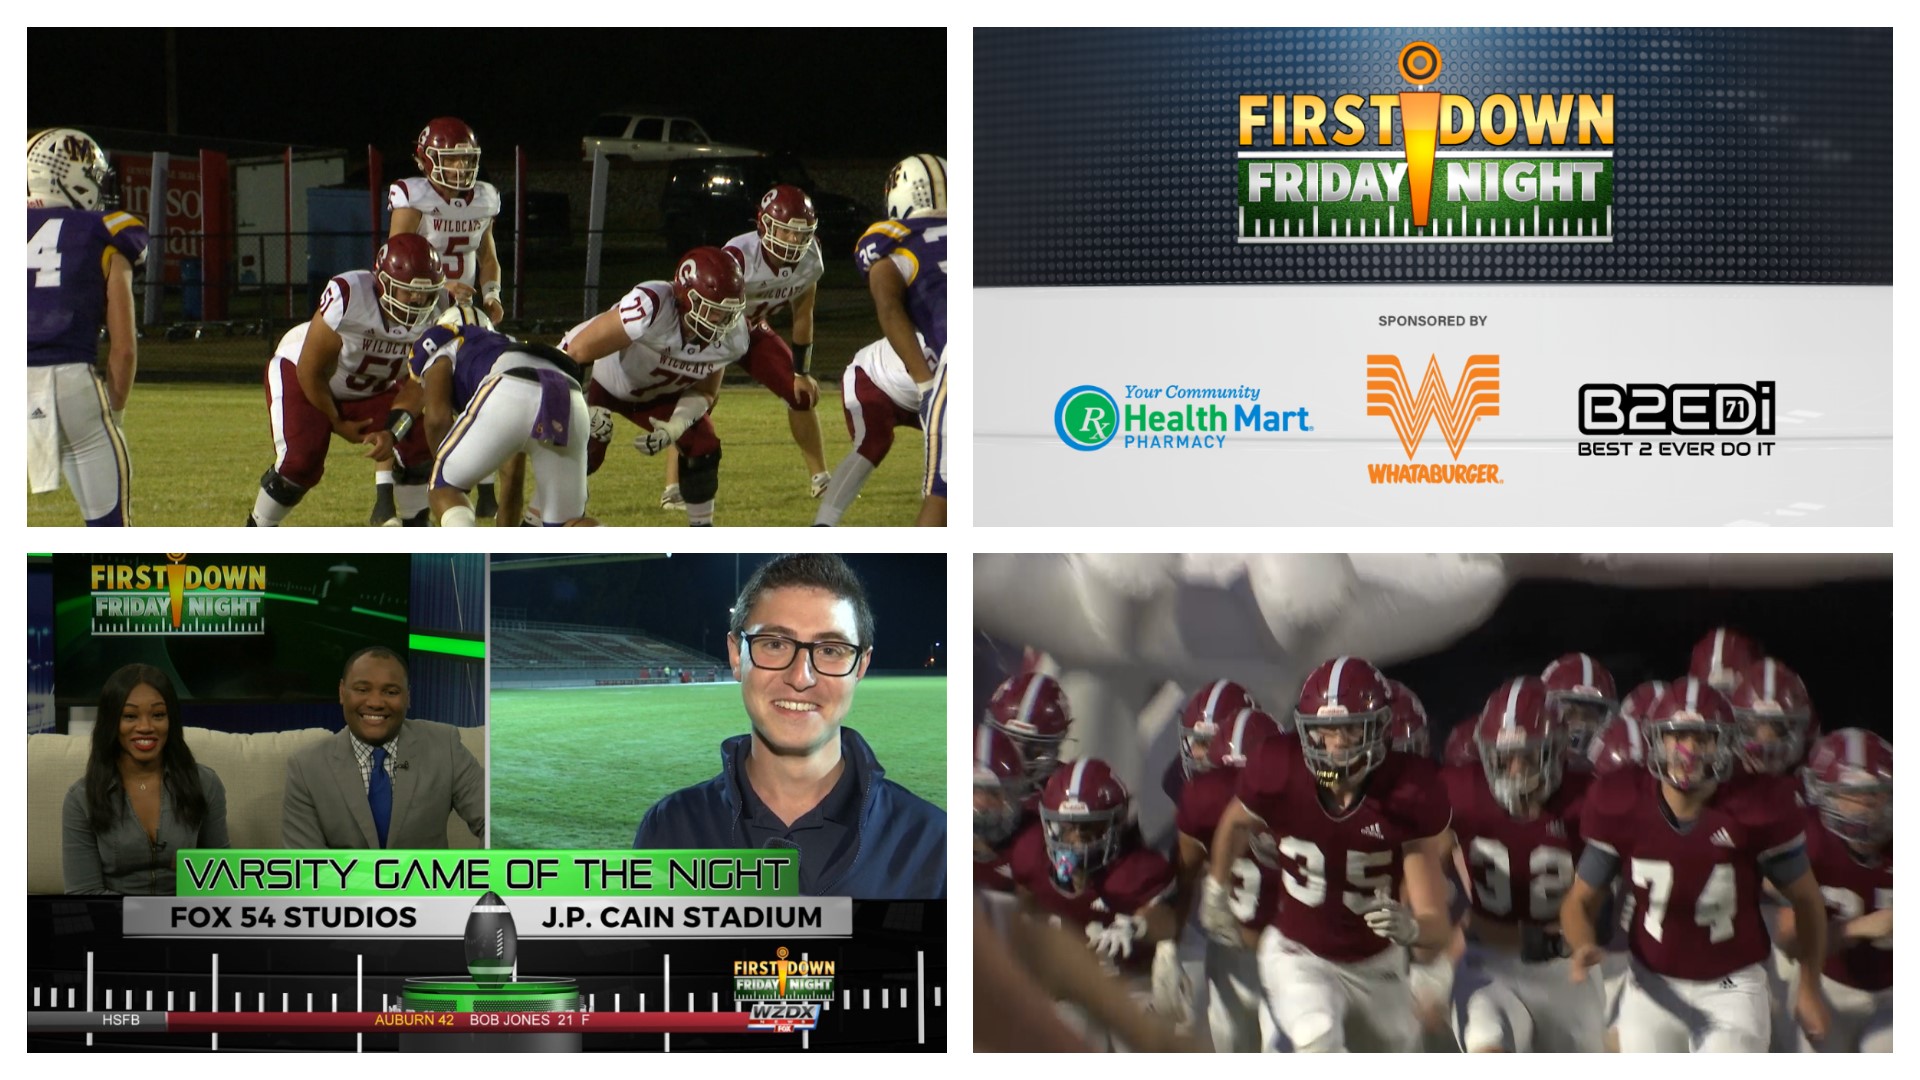 We've reached the midway point of the high school football season. Check out scores and highlights from Week 5 on the new edition of First Down Friday Night!